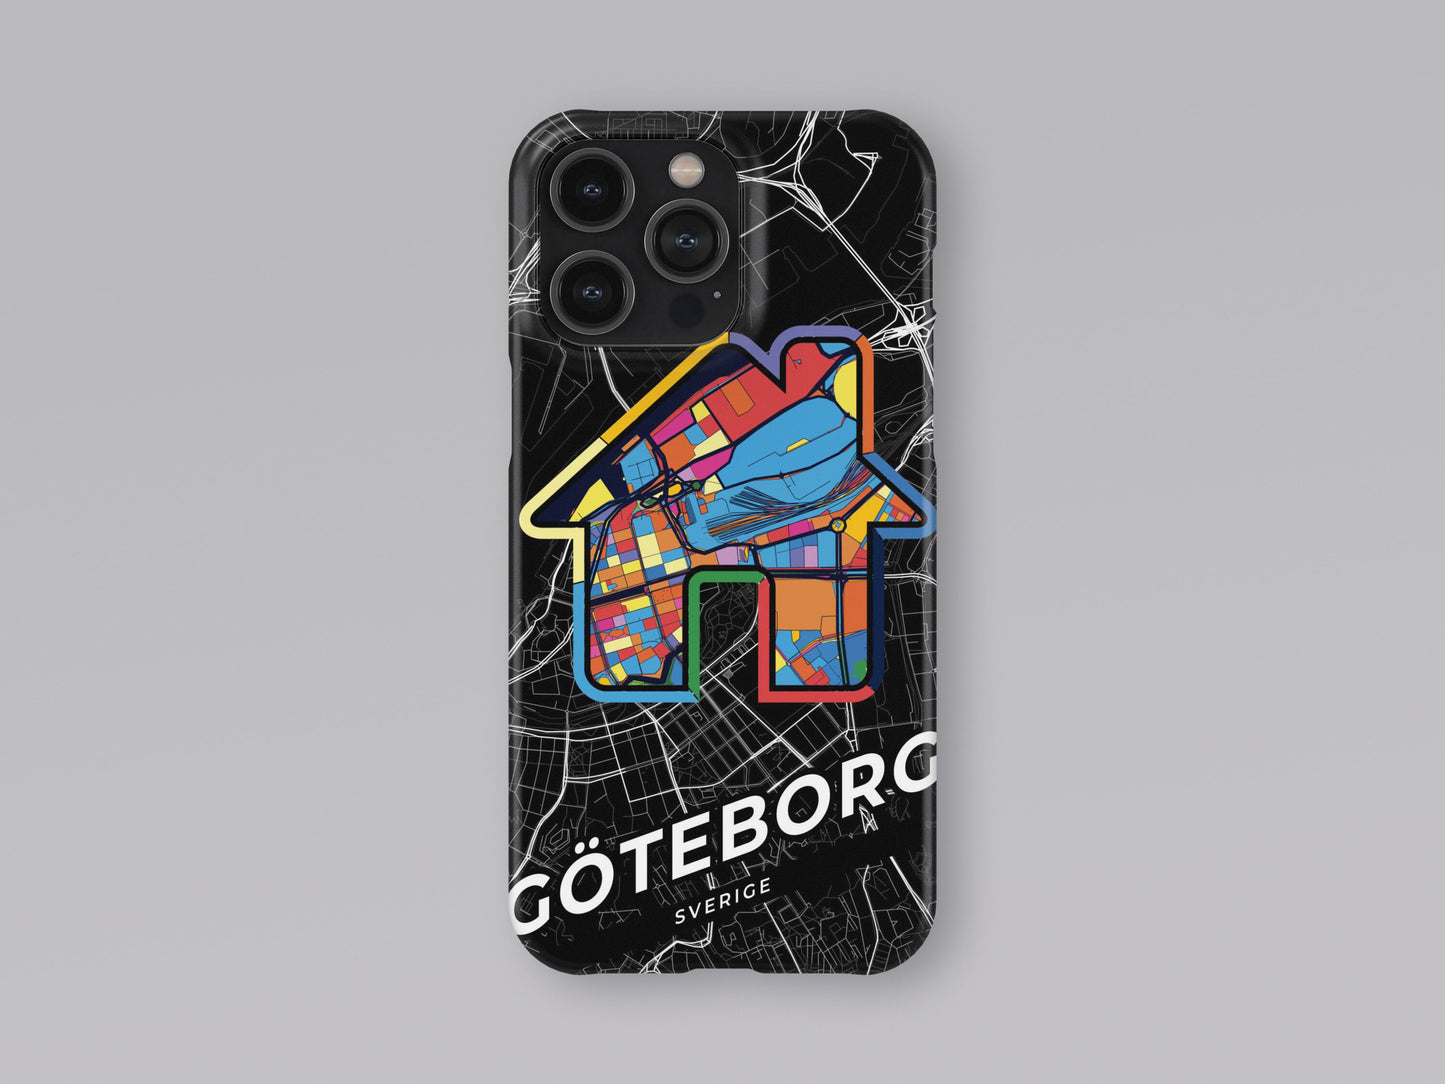 Gothenburg Sweden slim phone case with colorful icon. Birthday, wedding or housewarming gift. Couple match cases. 3